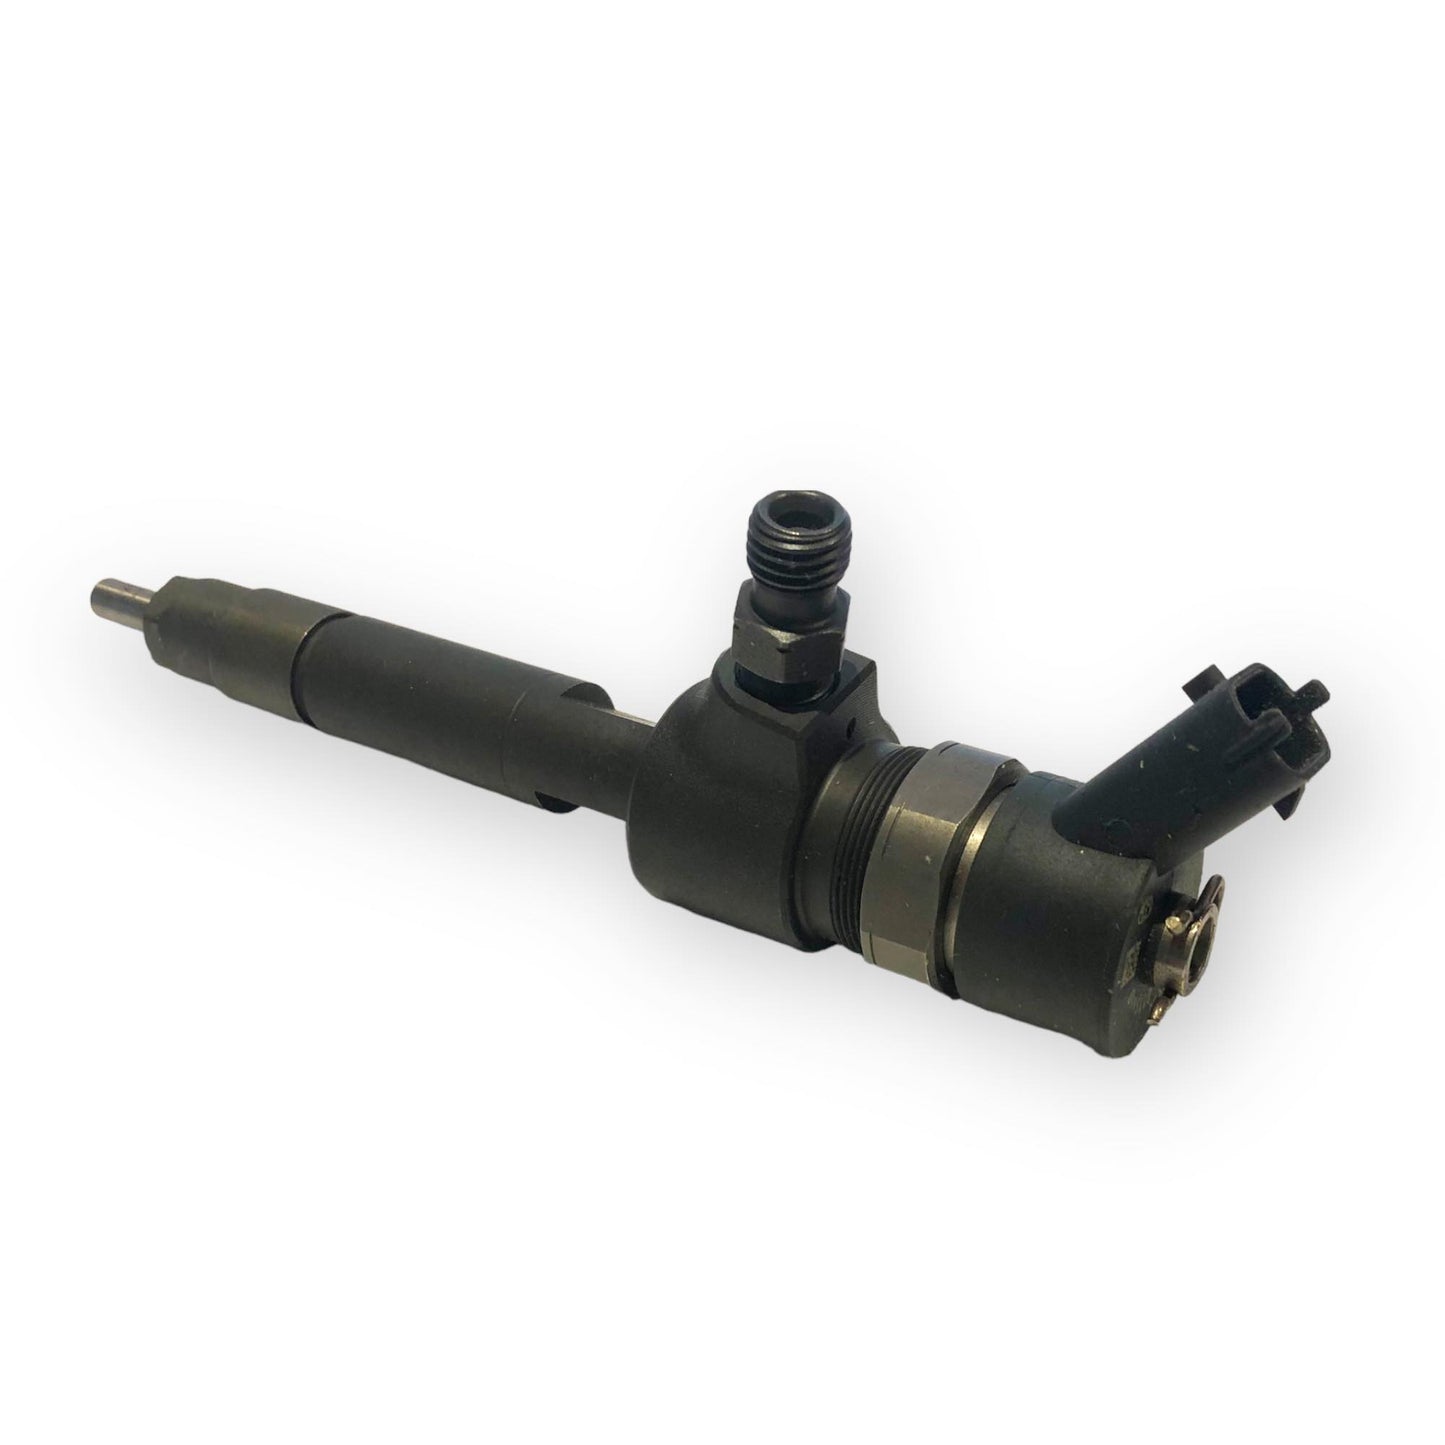 55200259 Injector for Alfa Romeo 147 and 159 1.9 JTDM